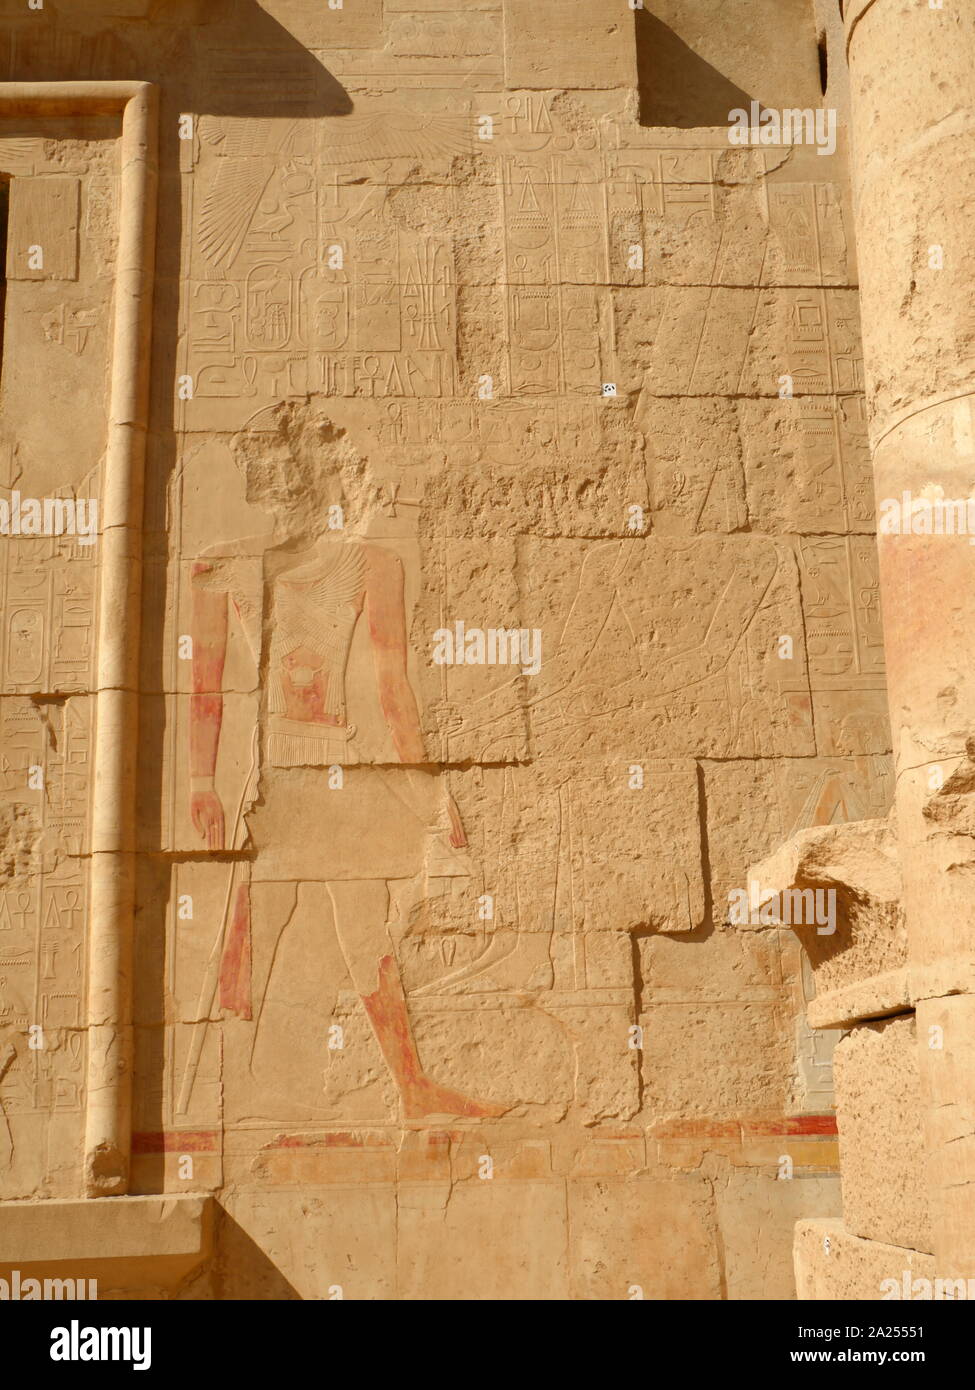 Defaced wall relief (painted) within the Temple of Hatshepsut, near Luxor, Egypt. The mortuary temple and tomb dates to the Eighteenth dynasty, and was designed by Senenmut, royal steward and architect of Hatshepsut. It was constructed during the 15th century BC, During the Eighteenth dynasty Stock Photo